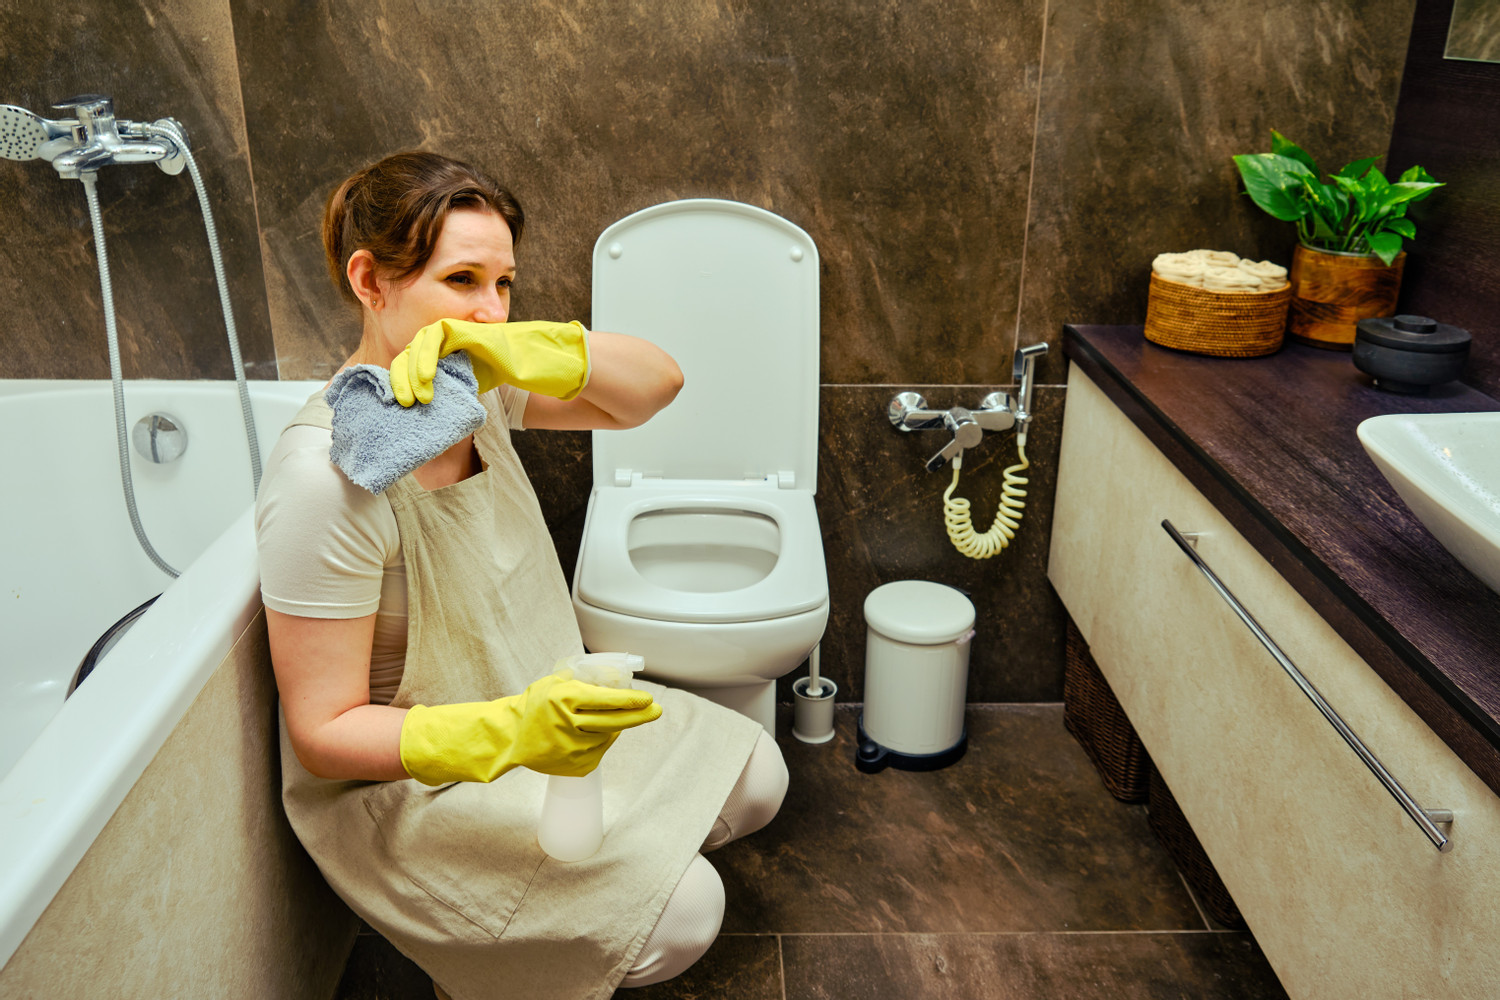 Methods to get rid of the unpleasant odor of sewage